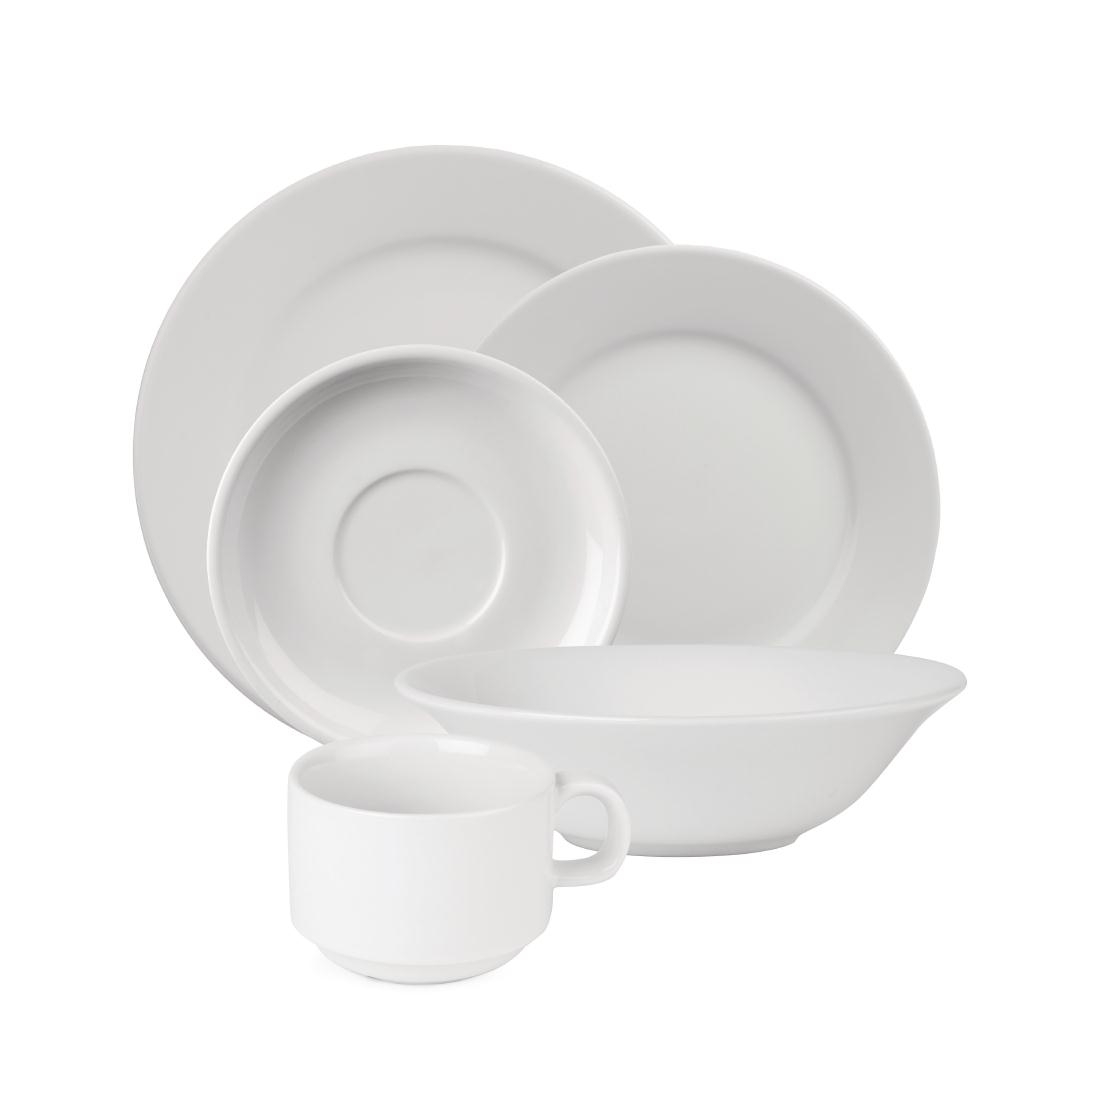 SPECIAL OFFER Athena Hotelware Five Piece Place Settings